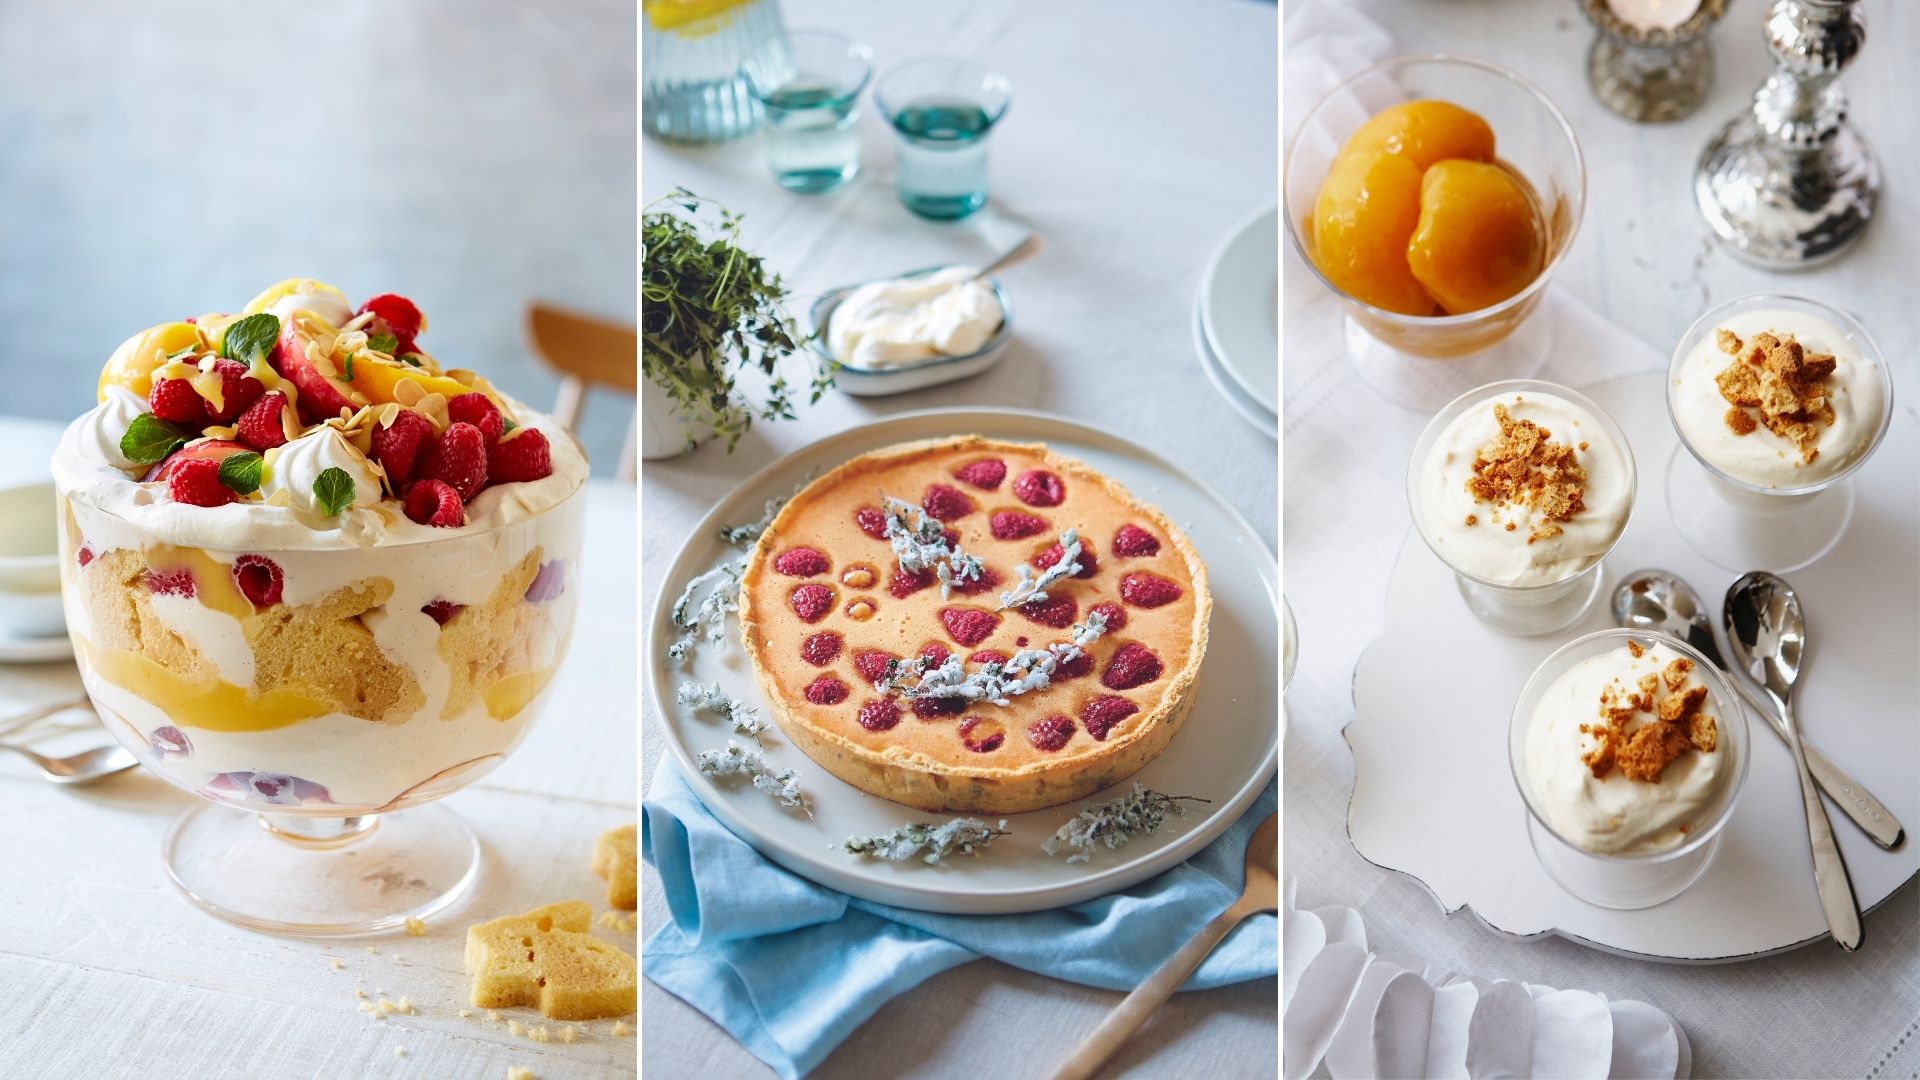 What To Bring For Dessert To A Dinner Party